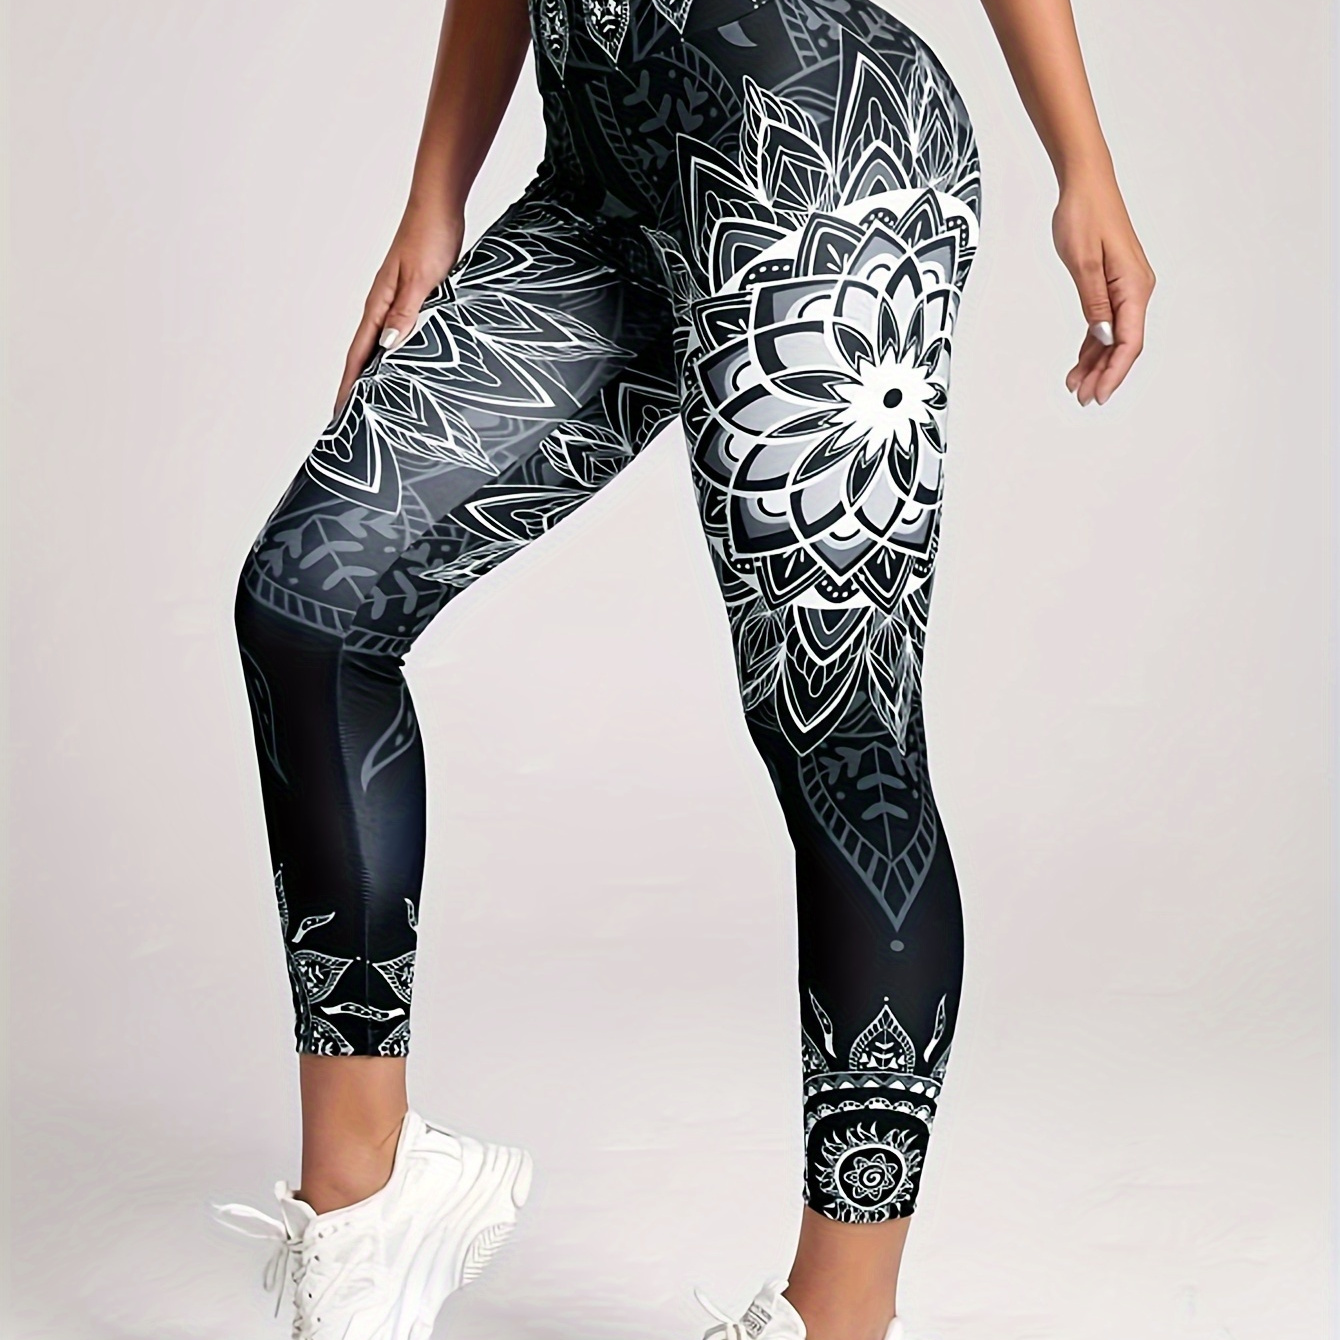 

Women's Mandala Kaleidoscope Print High-waisted Yoga Leggings, Slimming Tummy Control Fitness Tights For Gym, Cycling, Sports Spring/summer Collection For Fall & Winter